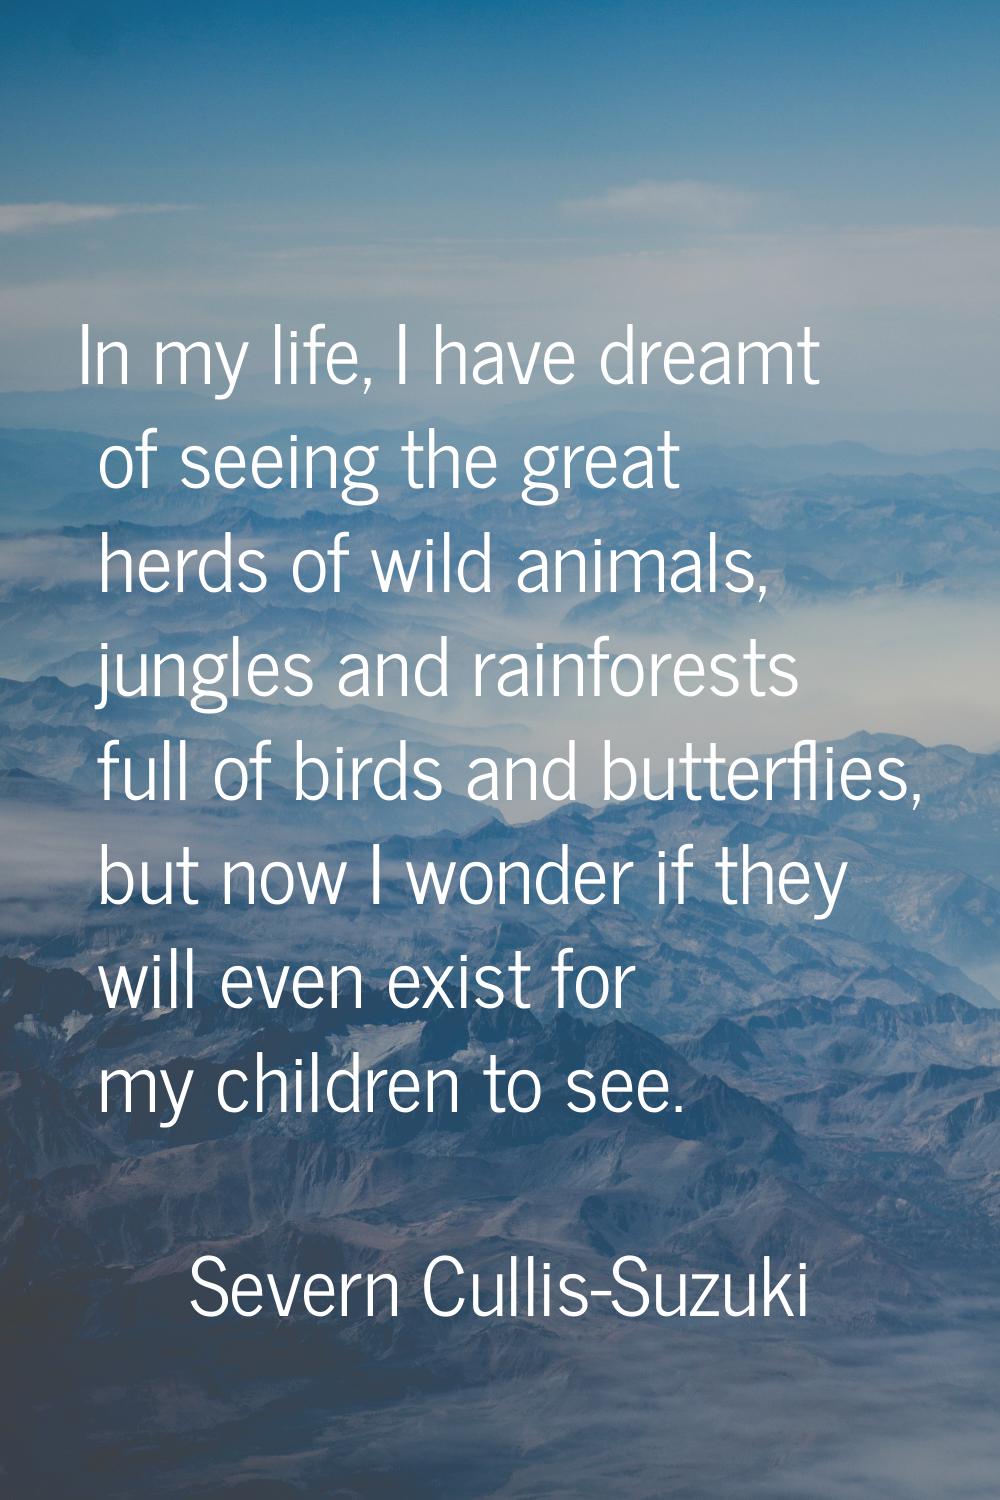 In my life, I have dreamt of seeing the great herds of wild animals, jungles and rainforests full o